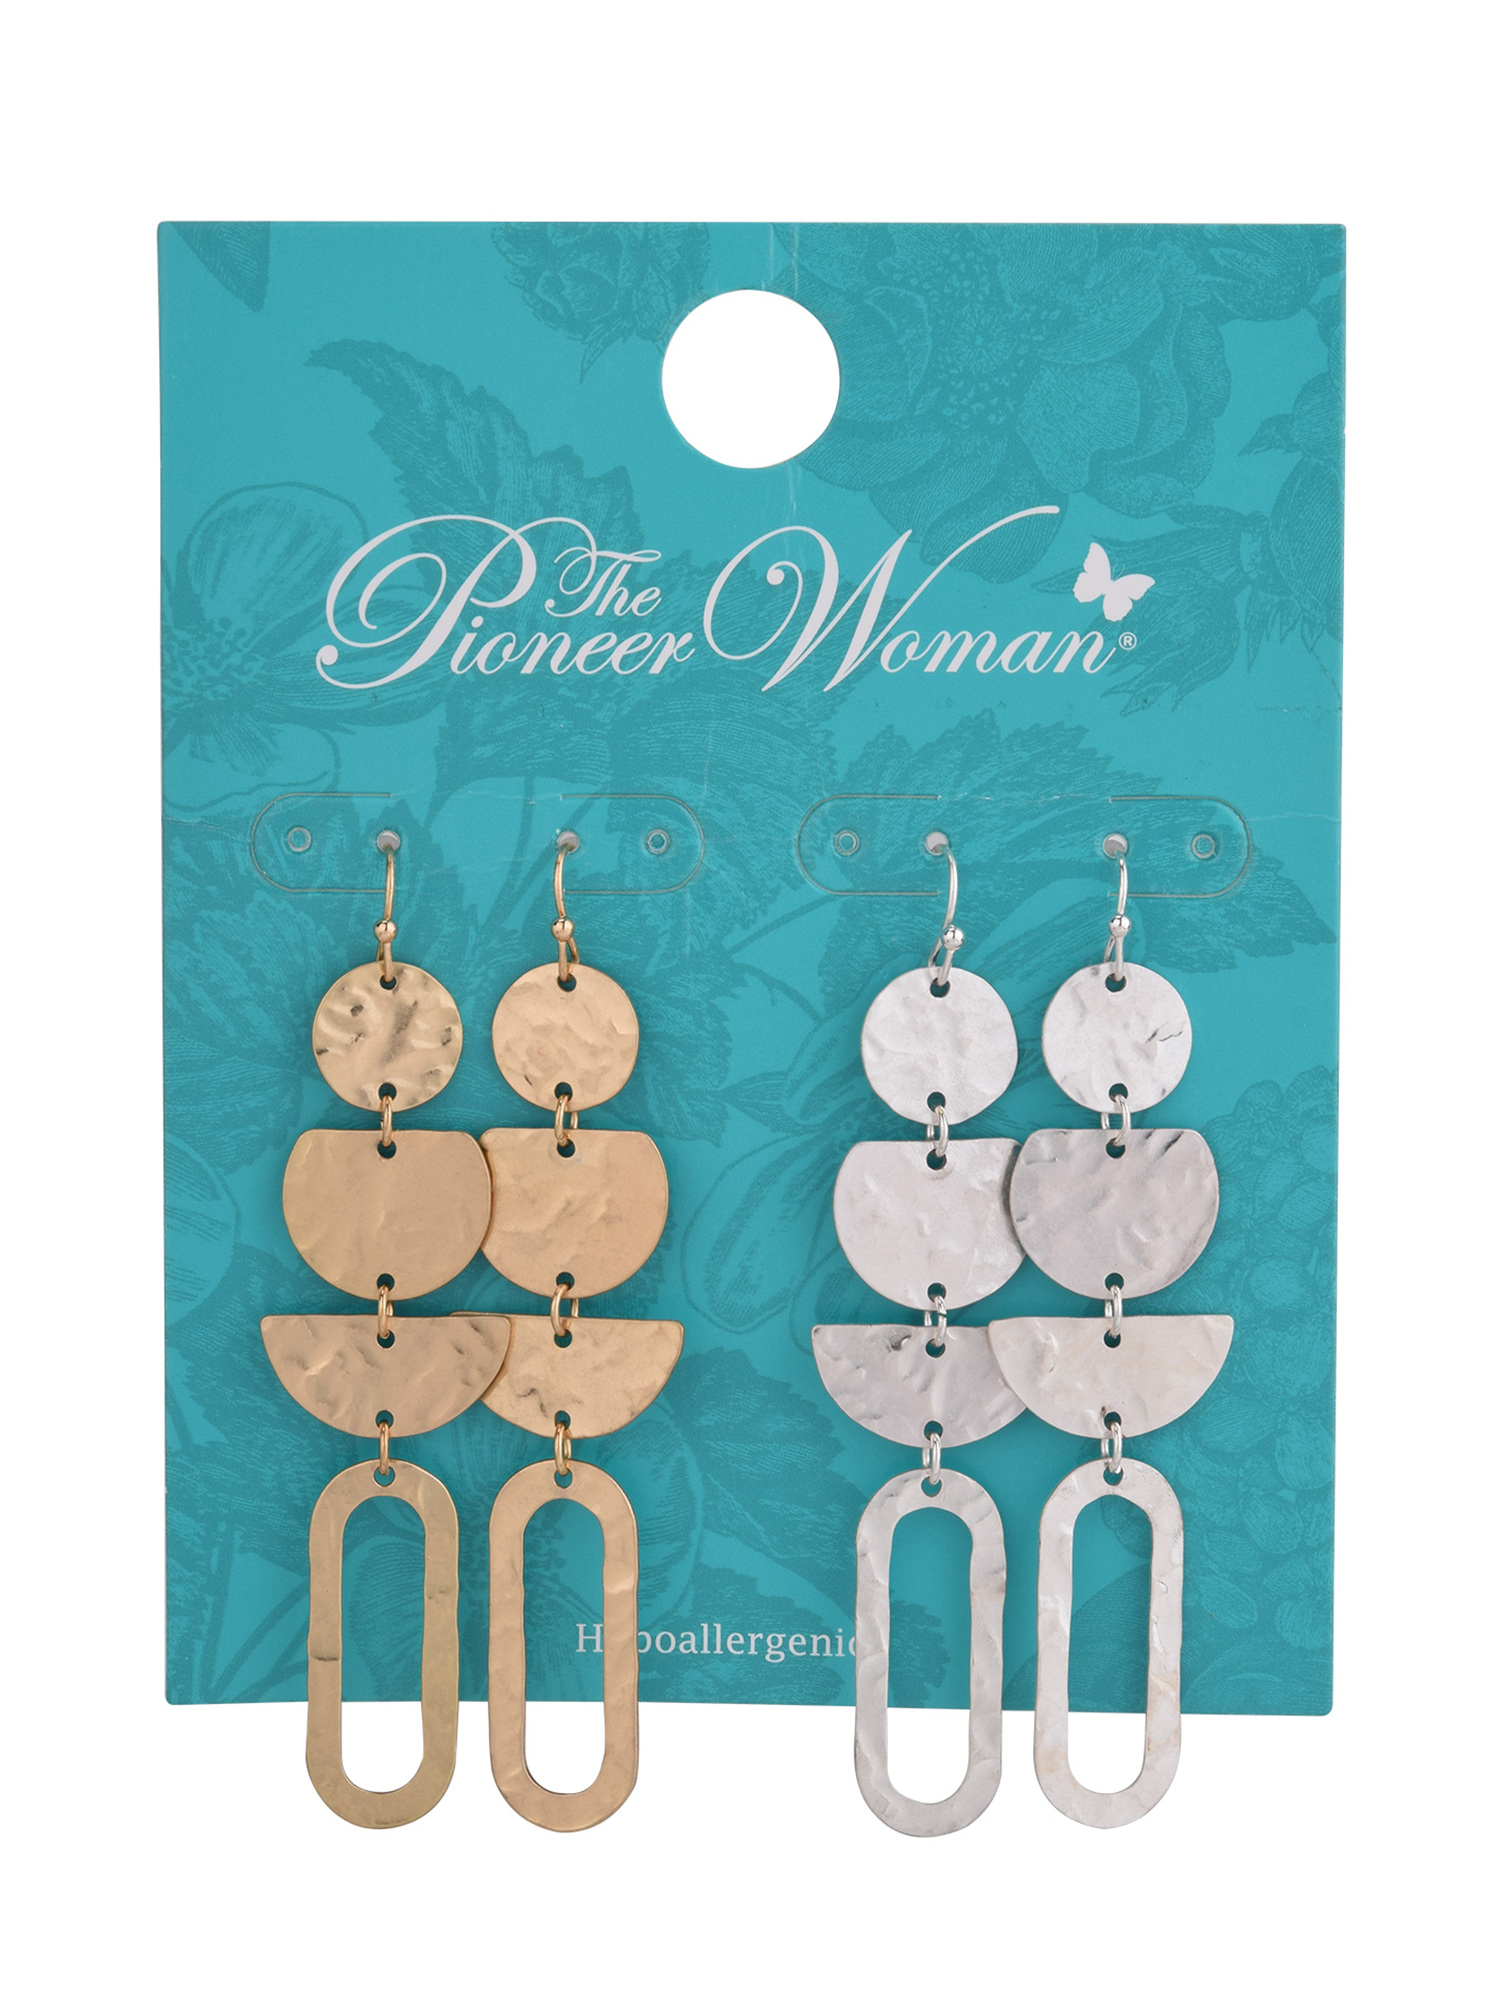 The Pioneer Woman - Women's Jewelry, Soft Silver-tone and Soft Gold-tone Metal Drop Duo Earring Set - image 6 of 6